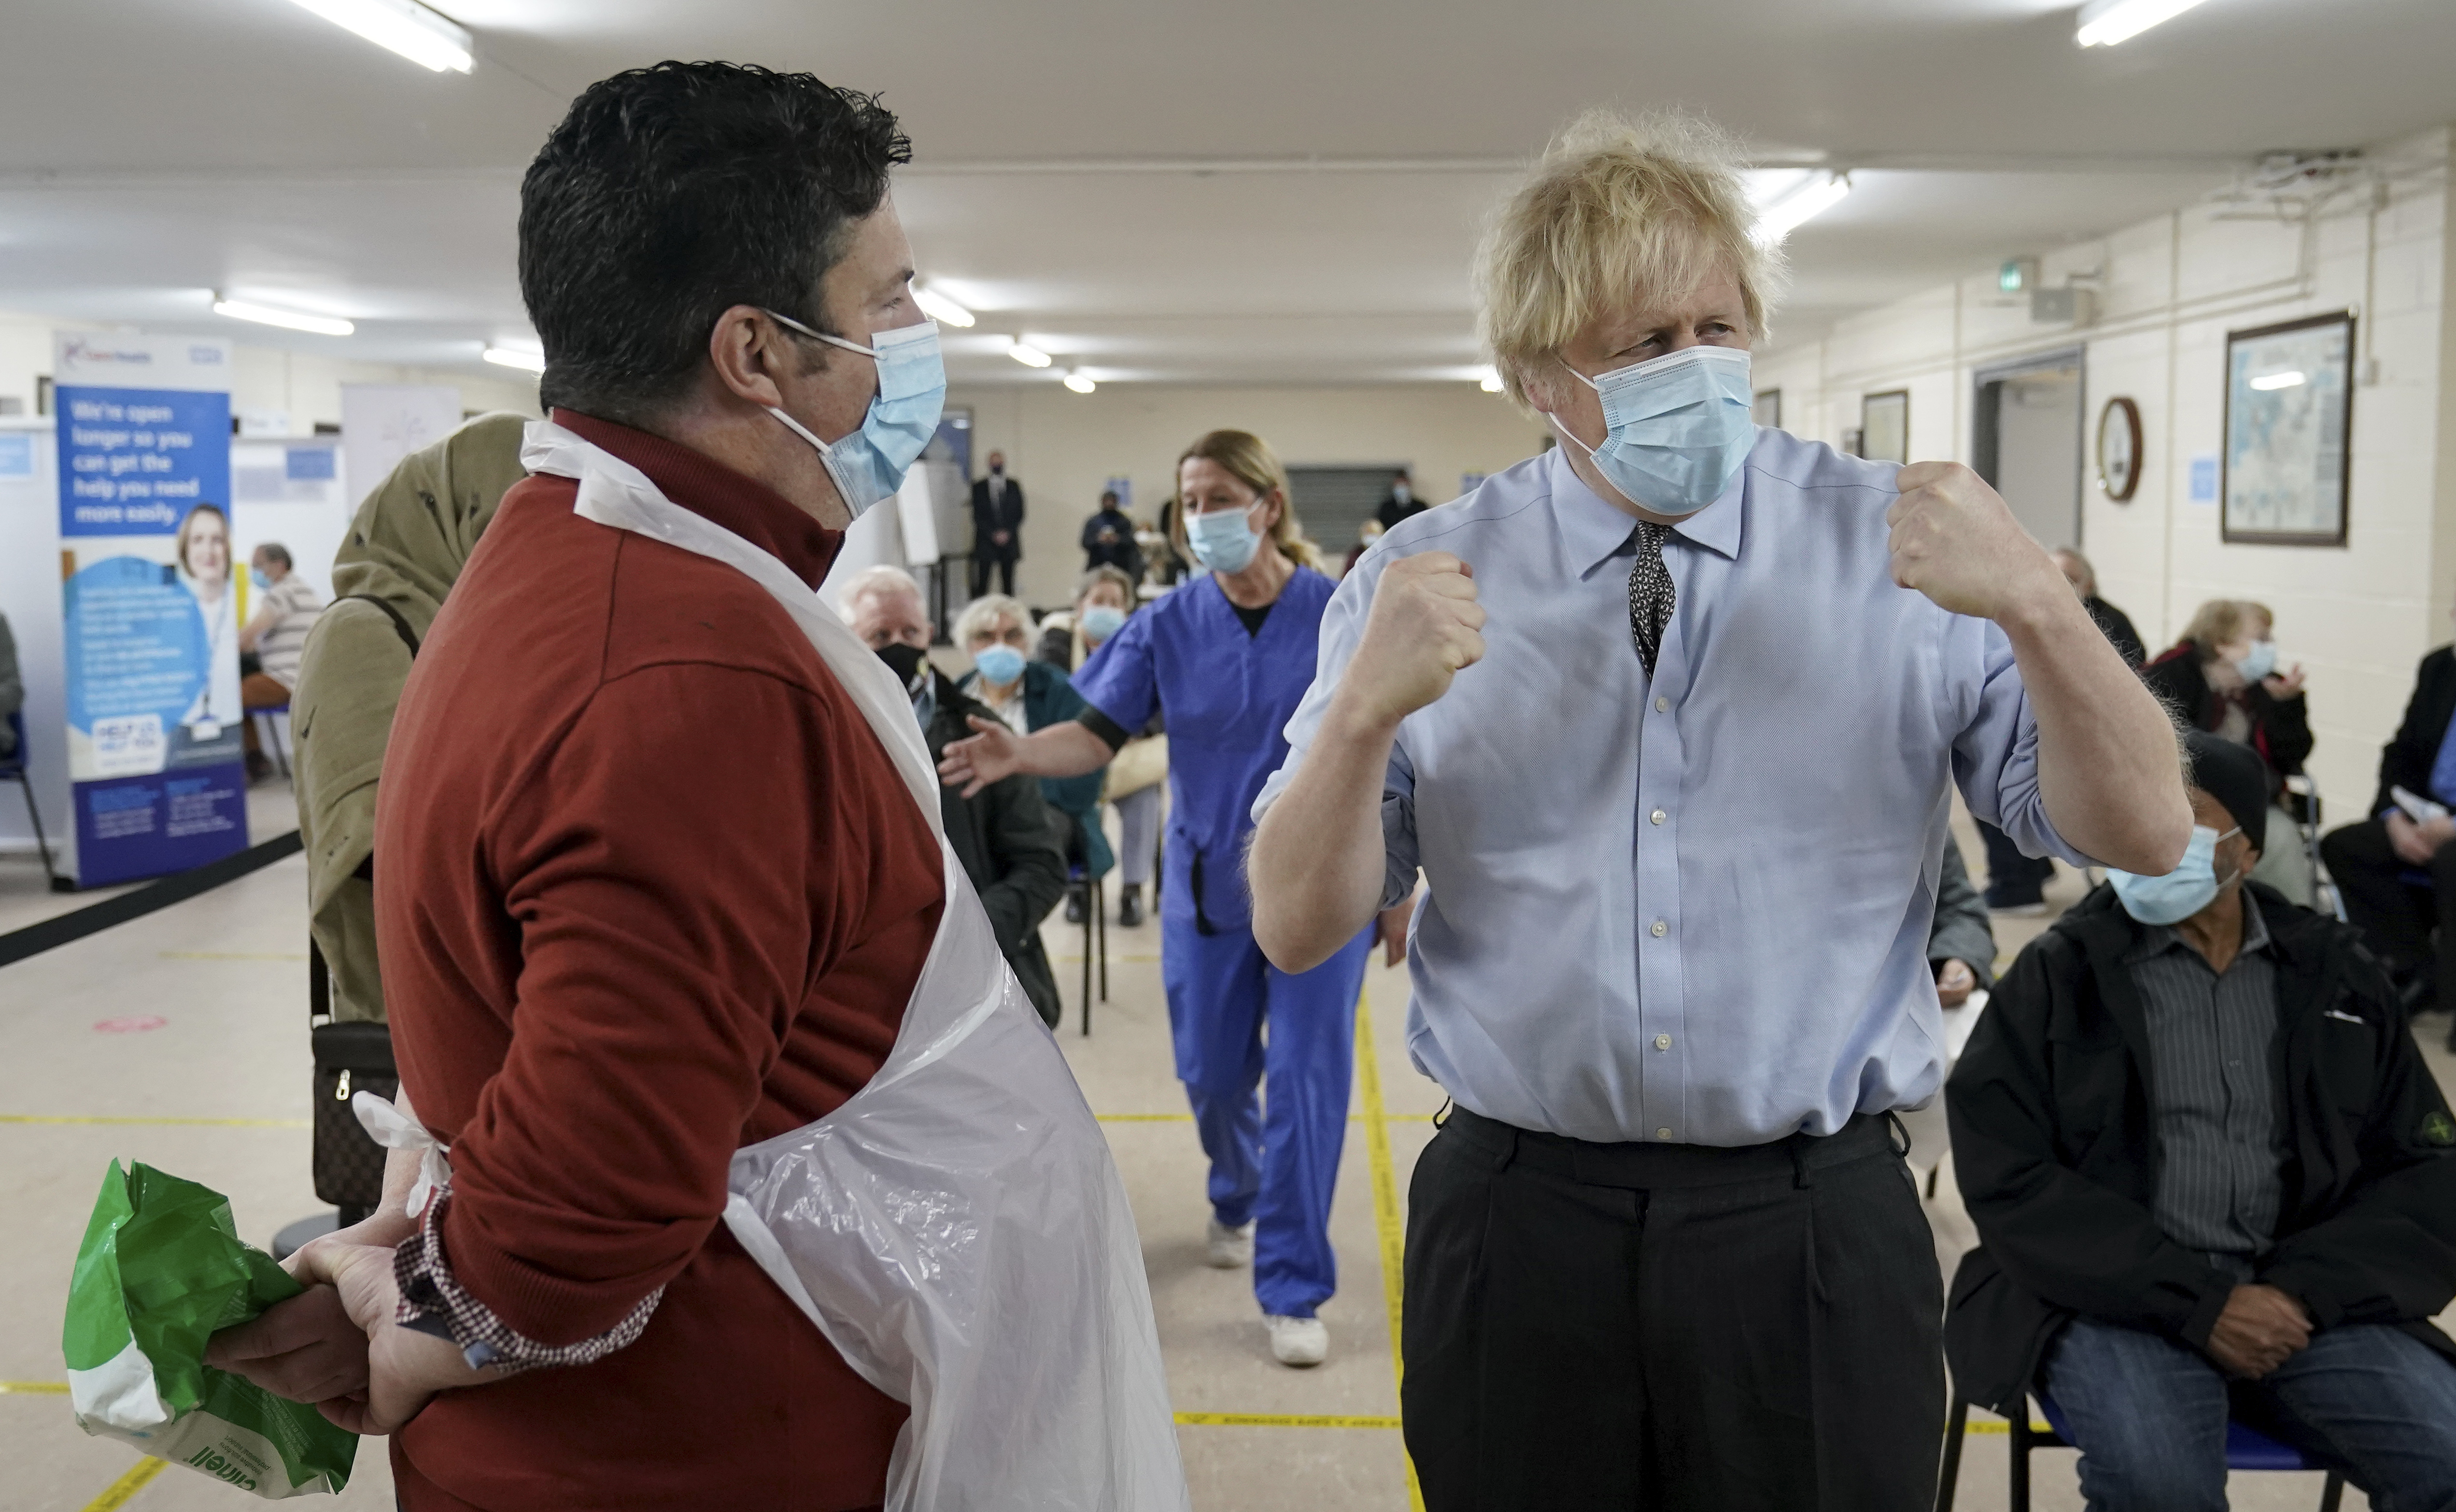 Britain's Prime Minister Boris Johnson talks to Christopher Nicholls who suffered from Covid at the same time as Johnson during a visit at a COVID-19 vaccination centre at the Indian Muslim Welfare Society (IMWS) Al-Hikmah-Centre in Batley, West Yorkshire, England, Monday, Feb. 1, 2021. (AP Photo/Jon Super, pool)